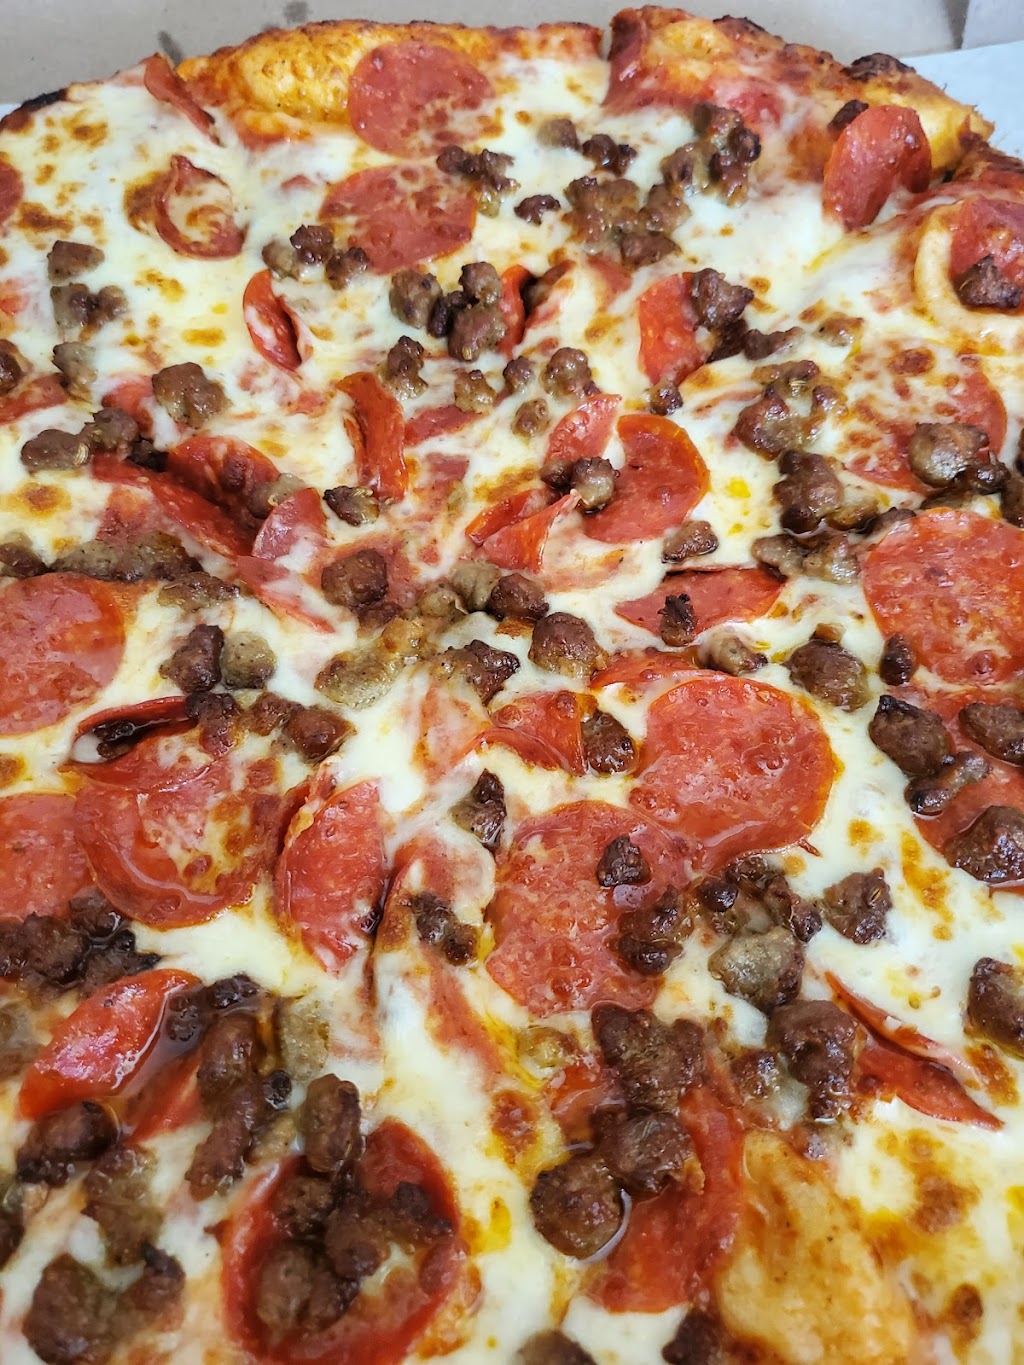 Red Maple Pizza | #204, 1140, 25045 Red Maple Ln, Moreno Valley, CA 92551, USA | Phone: (951) 485-1213